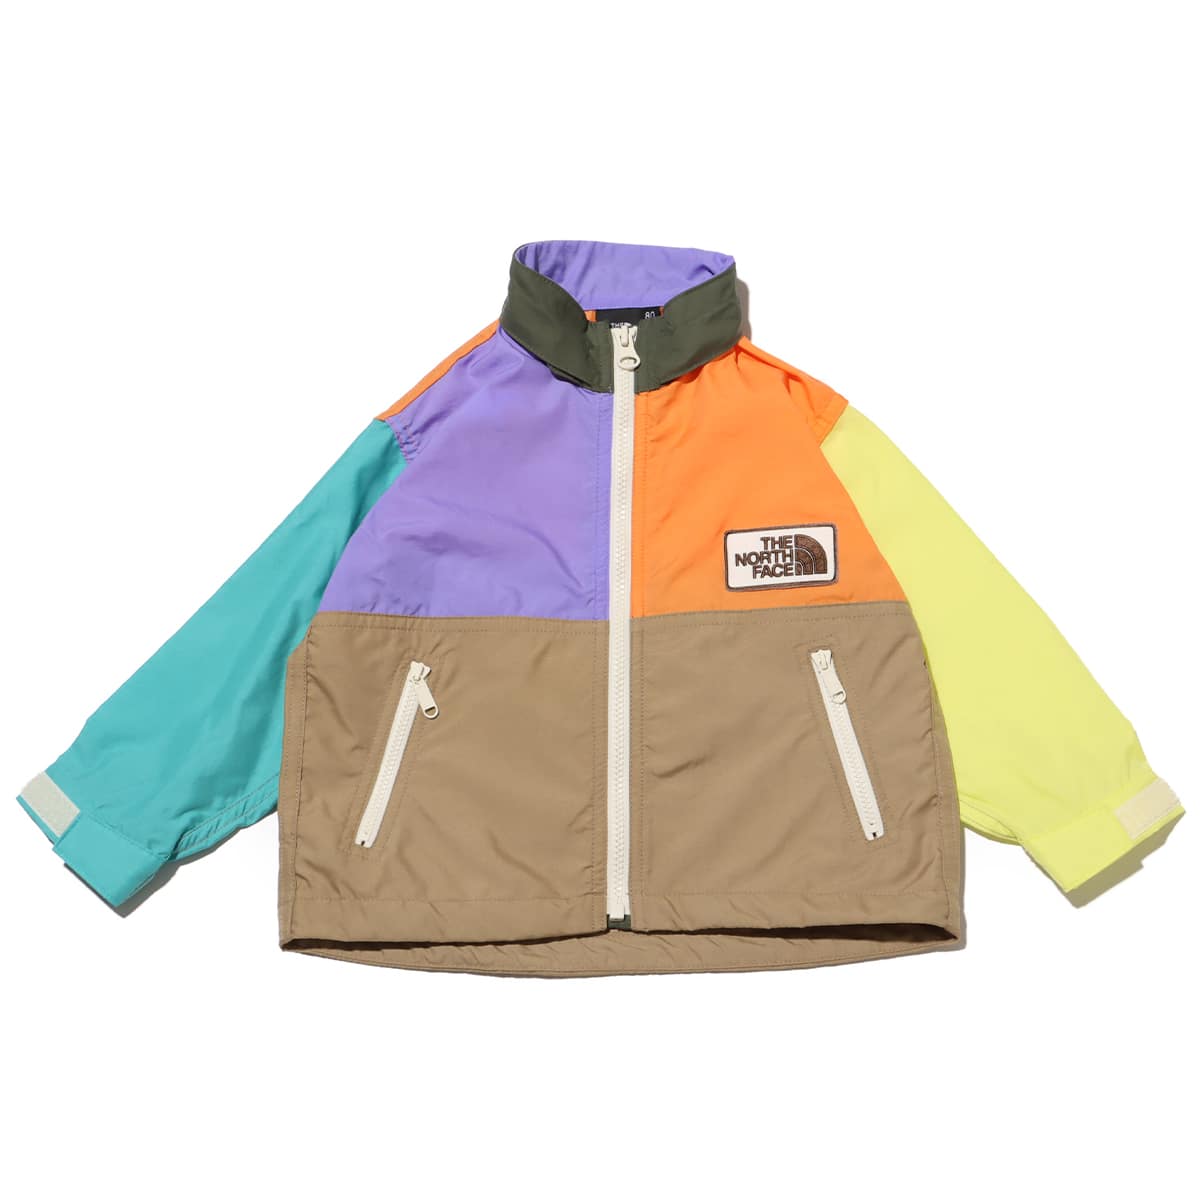 THE NORTH FACE Baby Grand Compact Jacket マルチカラー5 24SS-I